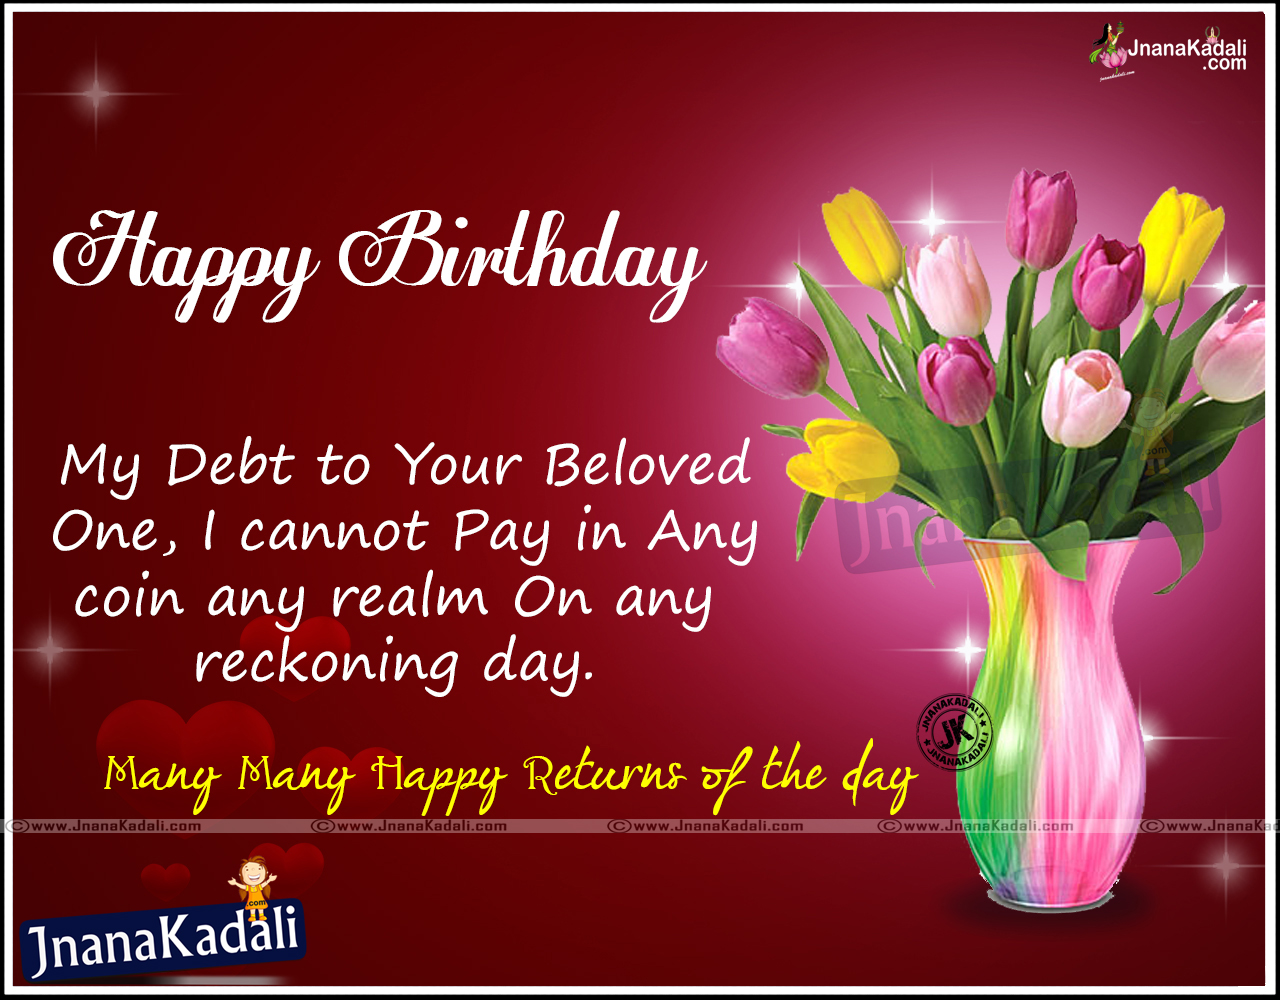 Best Friend Birthday Quotes and Wishes Gifts Greetings | JNANA KADALI